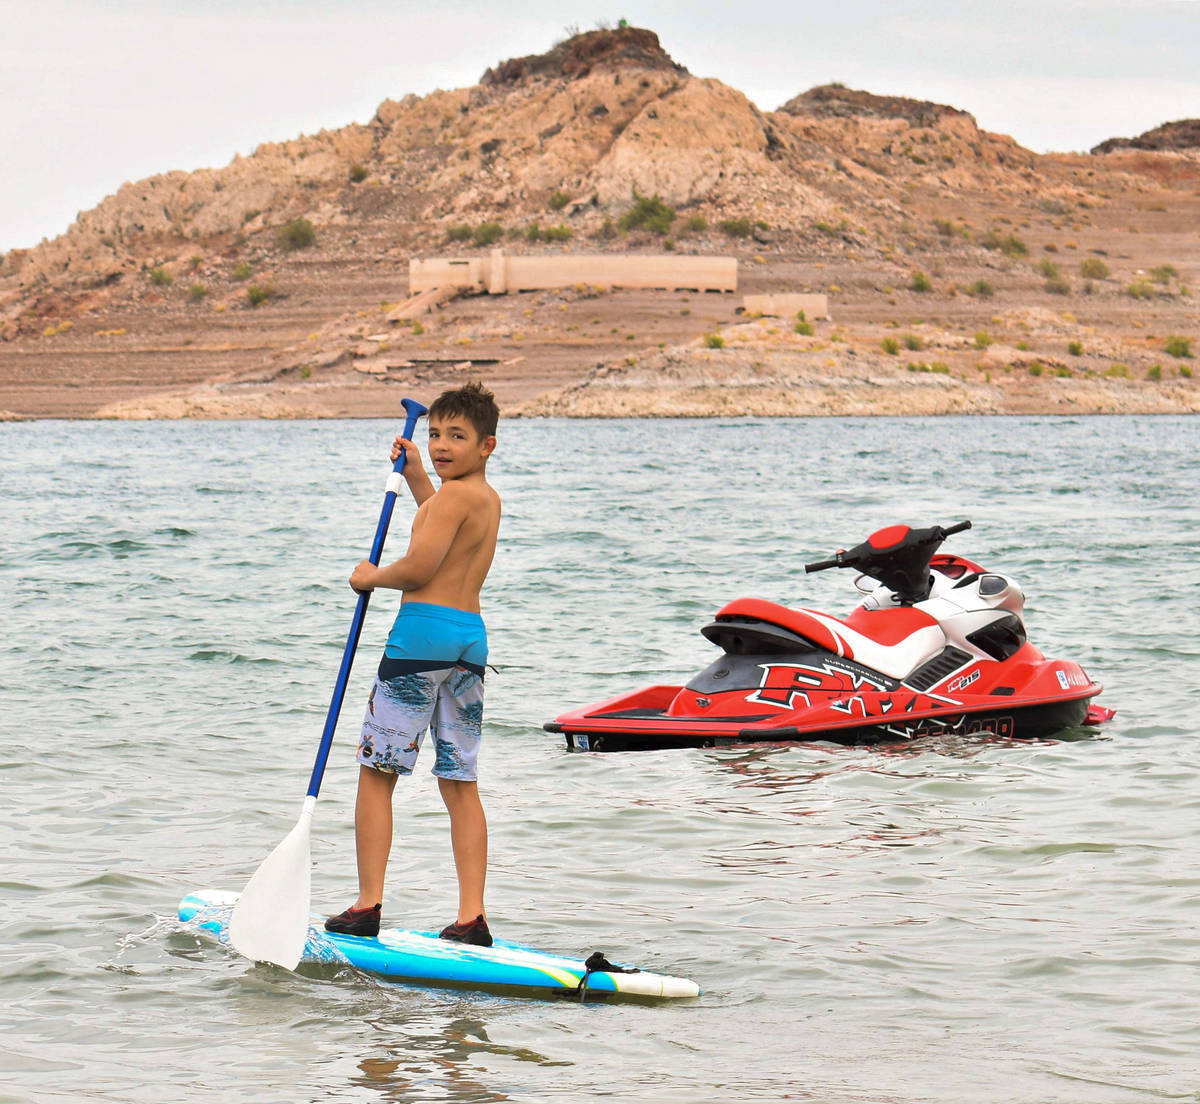 Zeke Varela, 10, looks back at his family as he shows off on the paddle board on Saturday, May ...